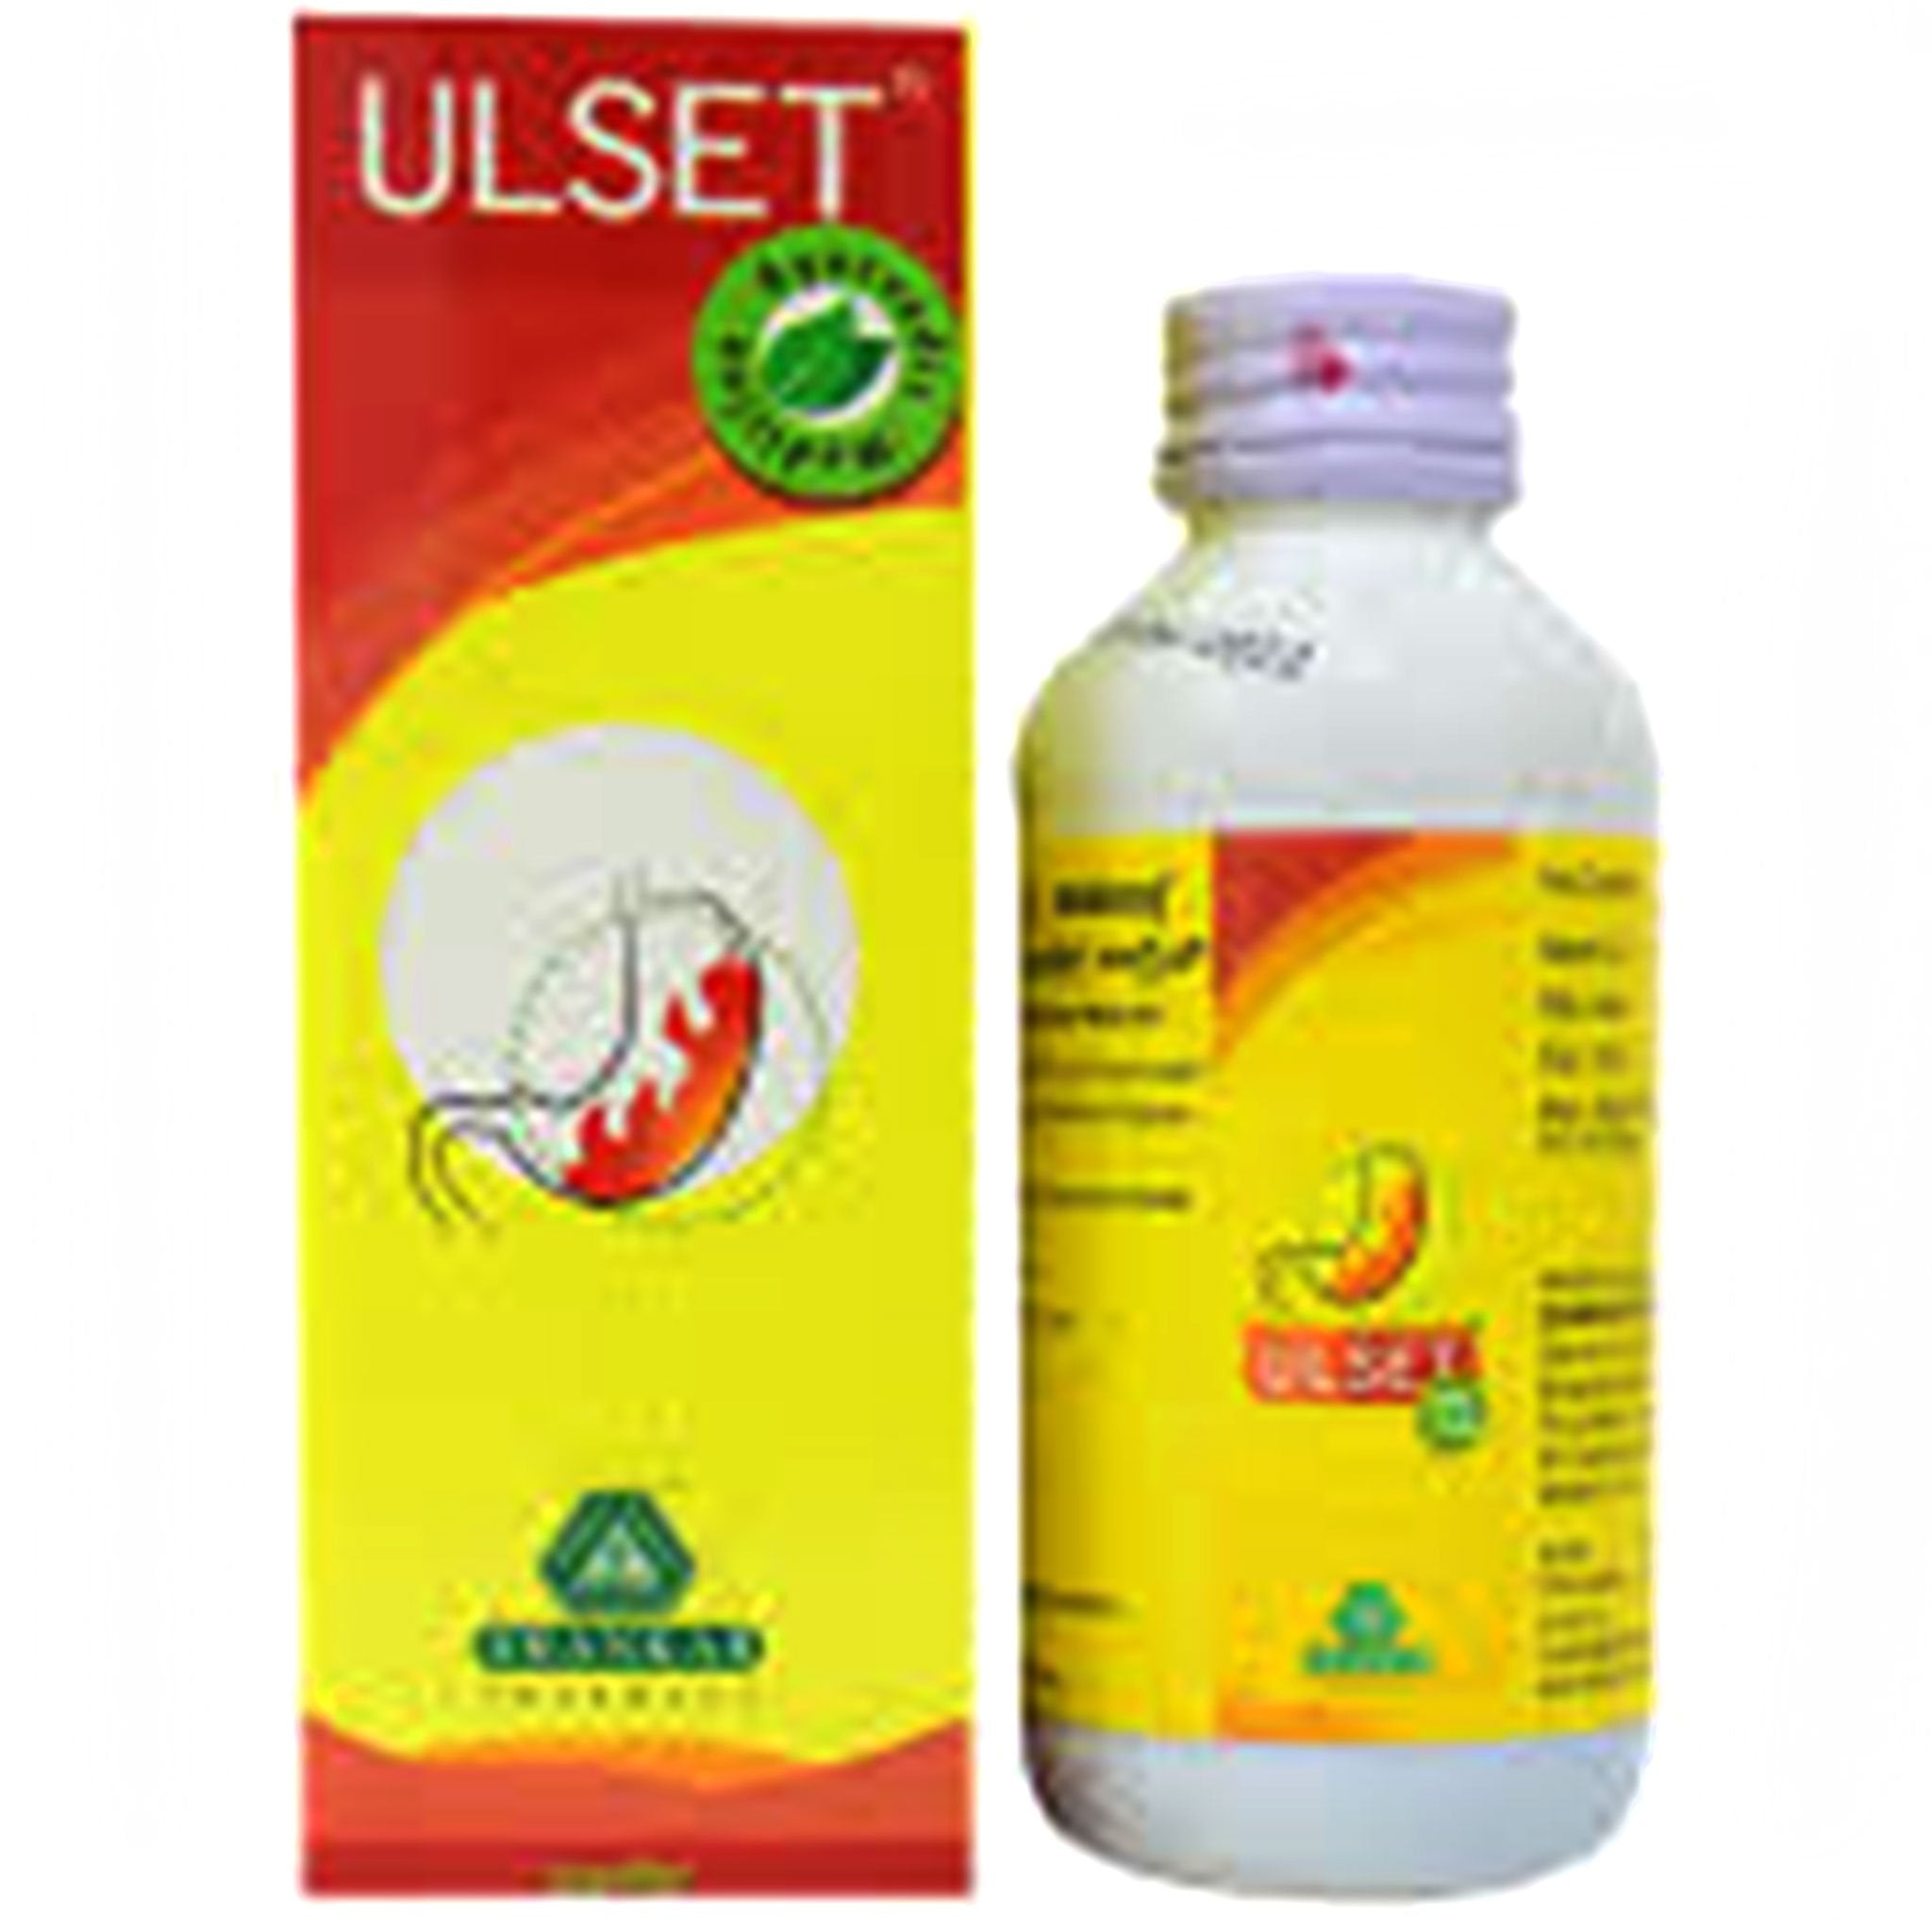 Ulset Syrup 100ml Value Pack of 2 